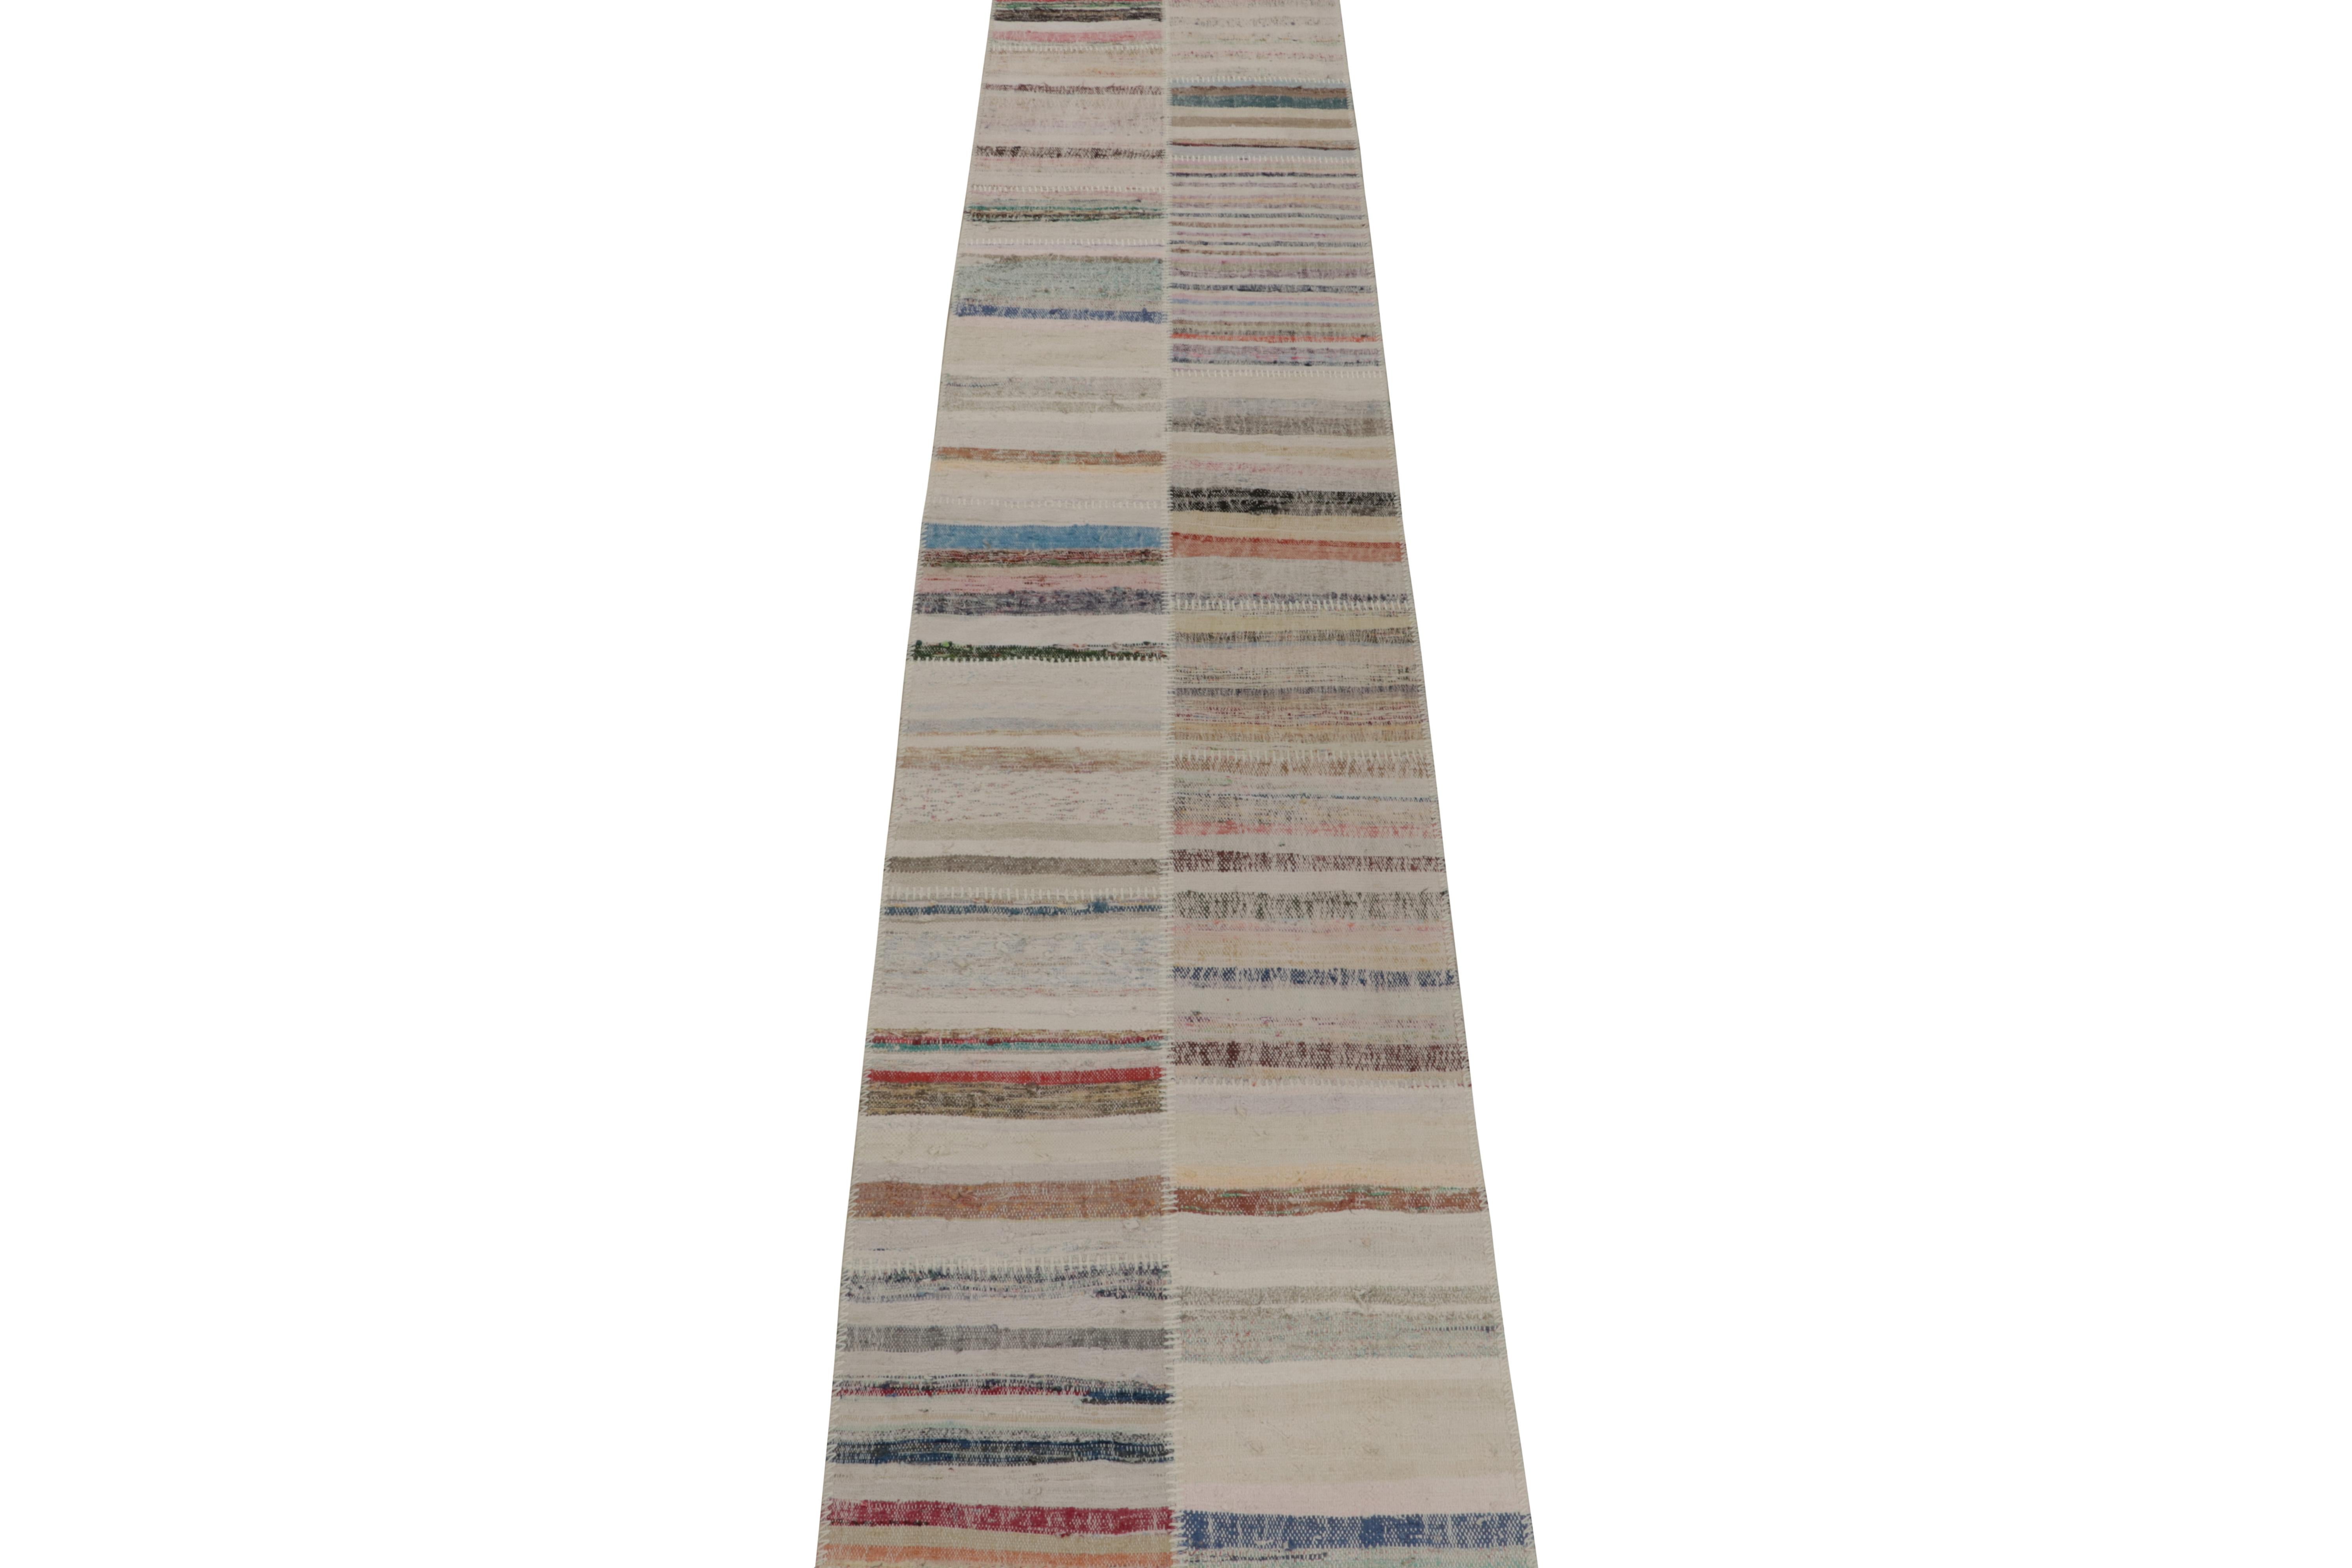 Handwoven in wool, Rug & Kilim presents a 3x12 runner from their innovative new patchwork kilim collection. 

On the Design: 

This flat weave technique repurposes vintage yarns in polychromatic stripes and striae, achieving a playful look with